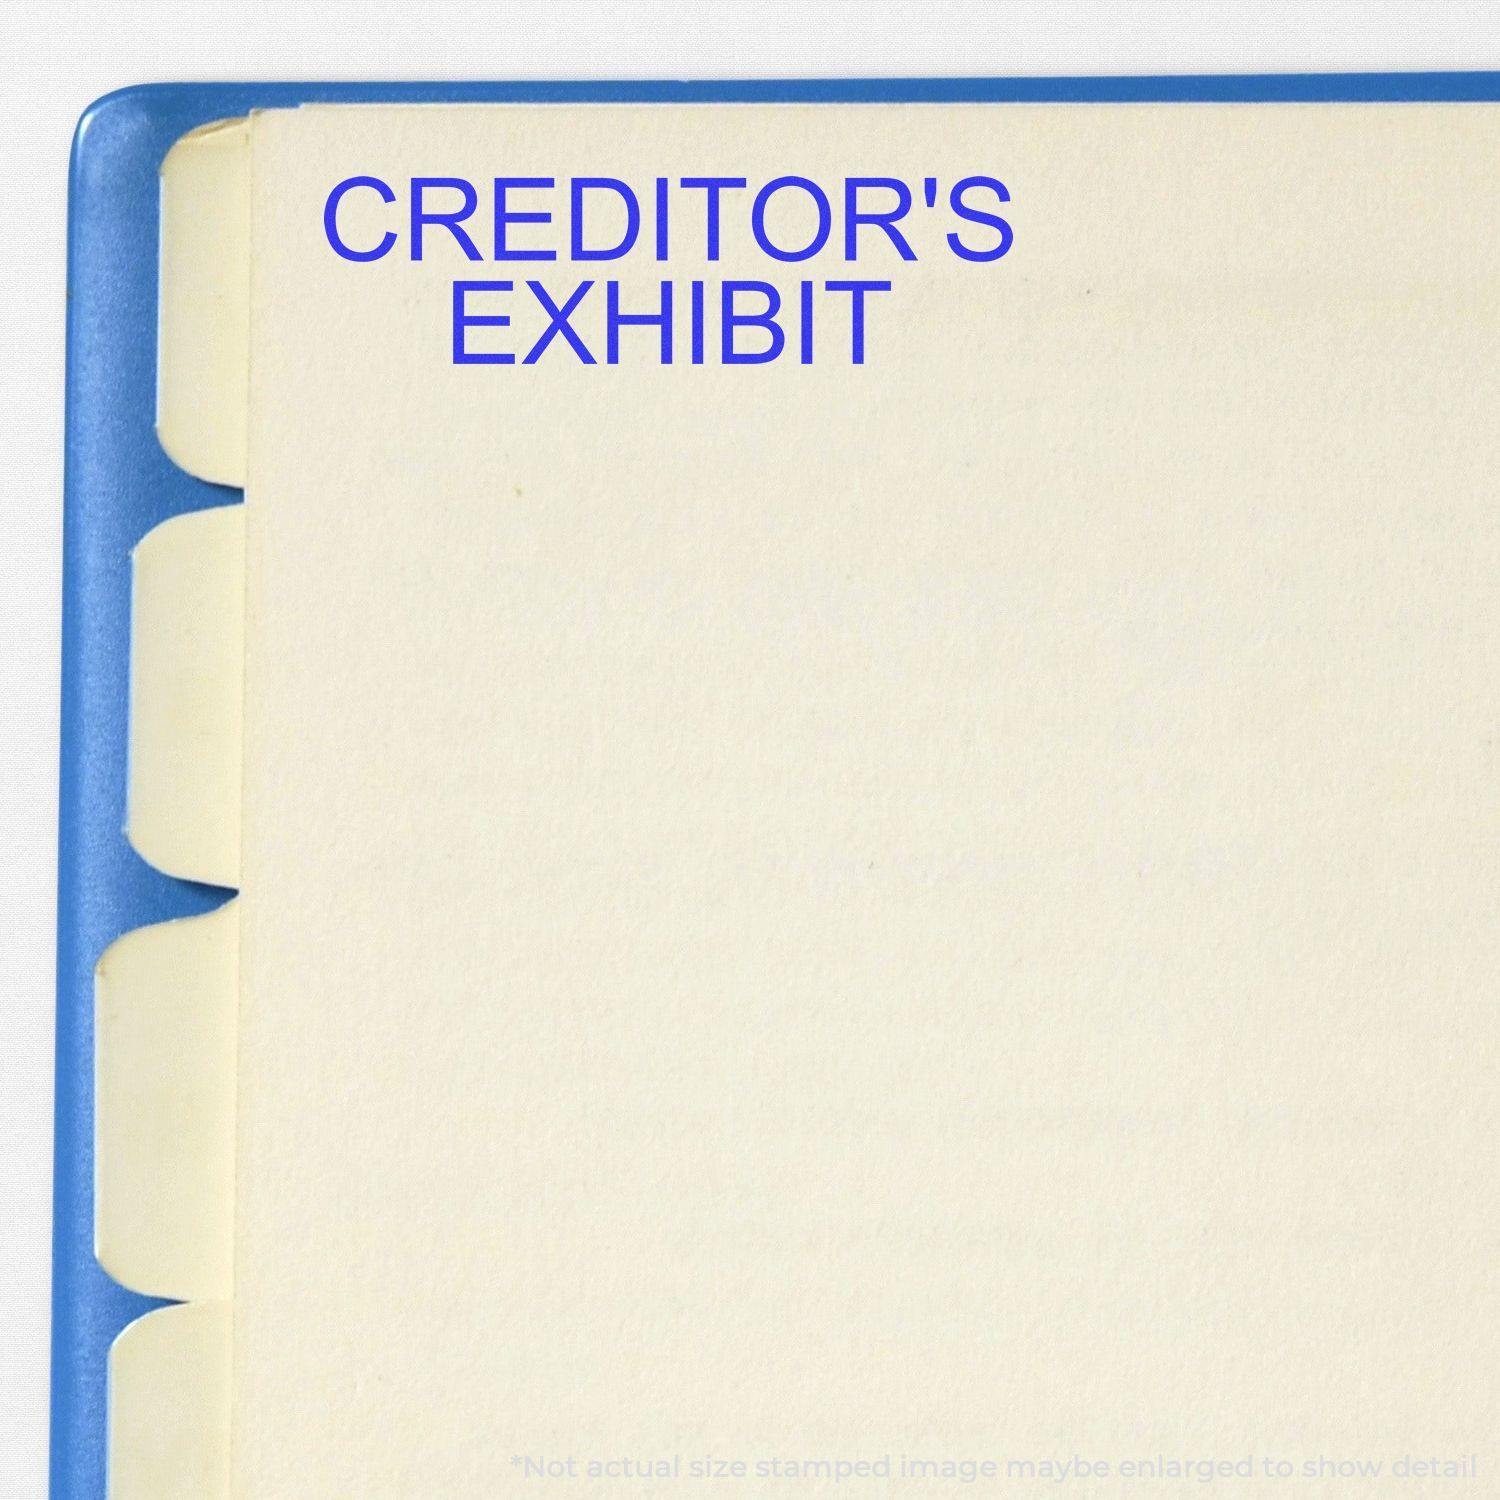 A self-inking stamp with a stamped image showing how the text "CREDITOR'S EXHIBIT" is displayed after stamping.